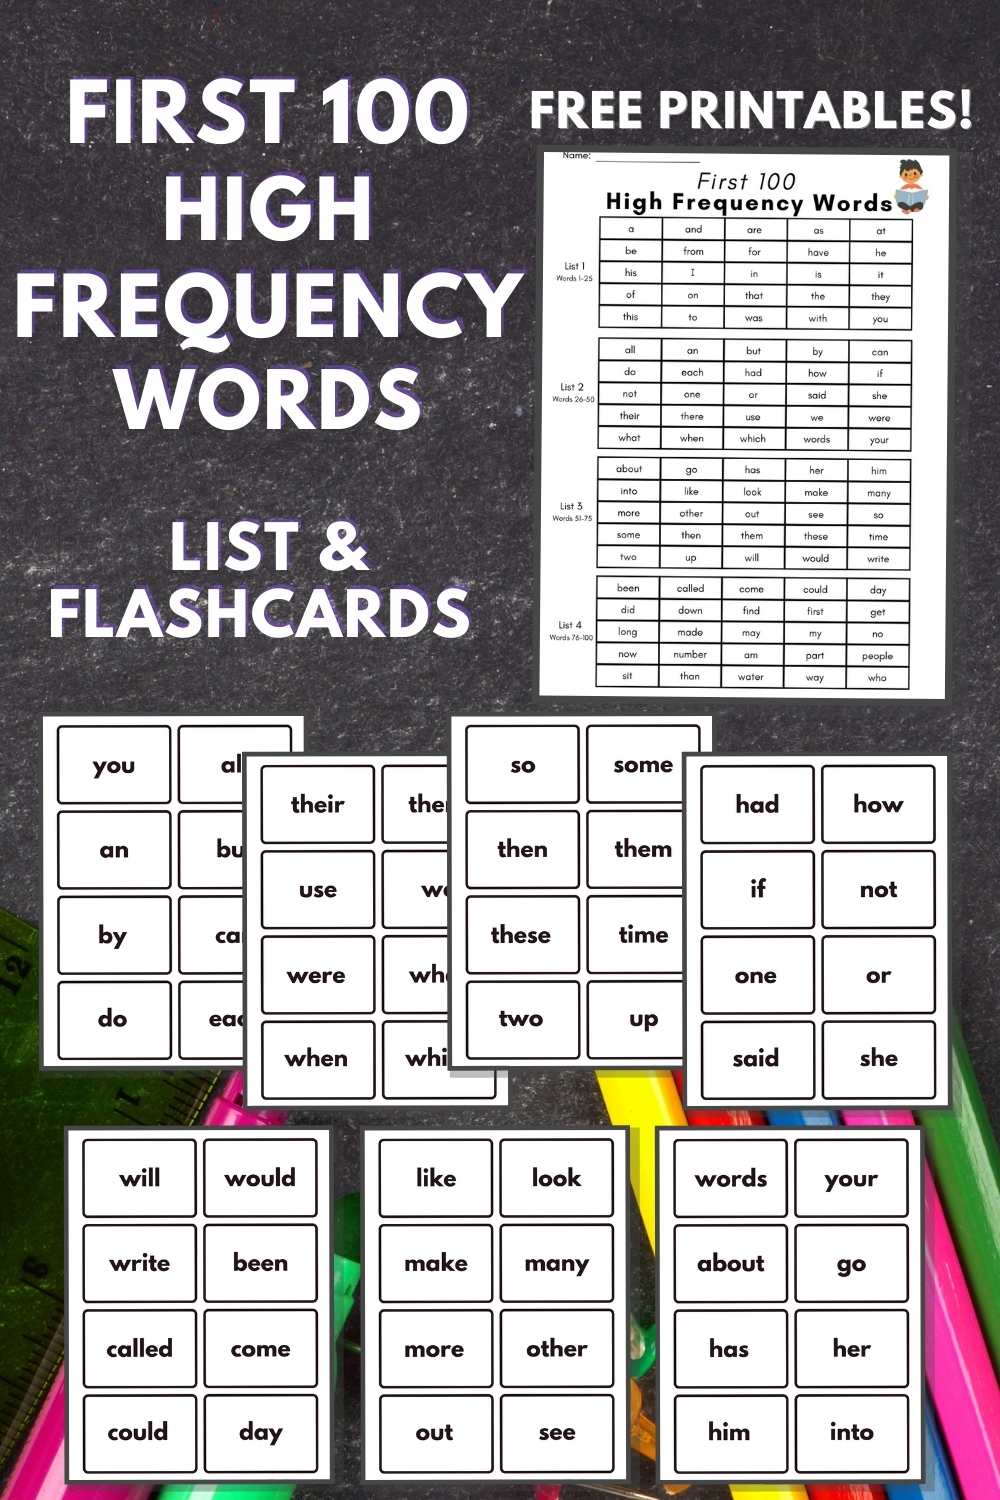 Graphic with "First 100 High Frequency Words" and the printables on a gray background.